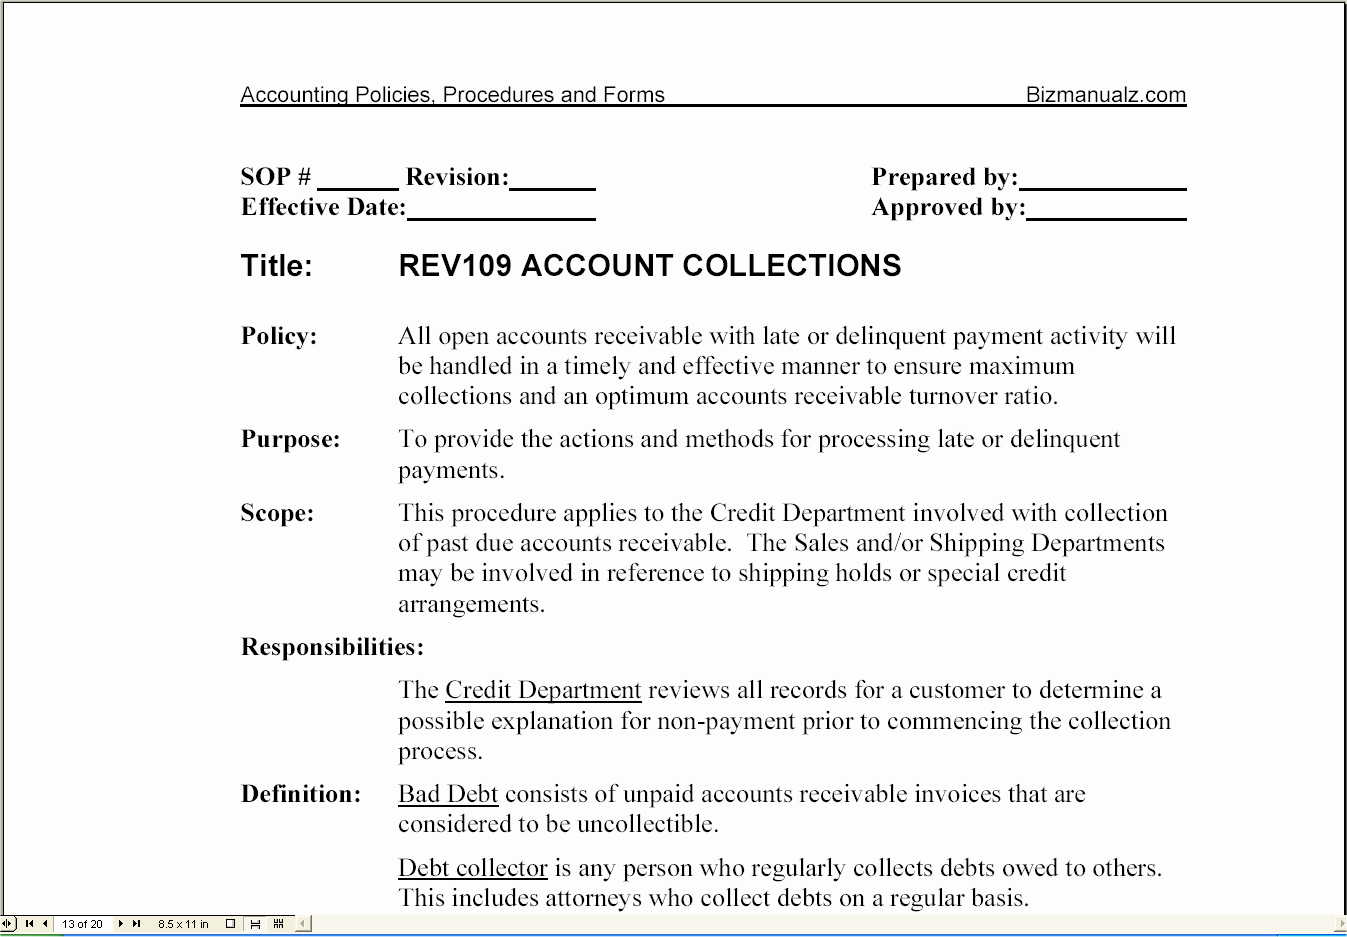 Policy and Procedure Template Examples Lovely Bizmanualz Accounting Policies Procedures and forms Mbaware